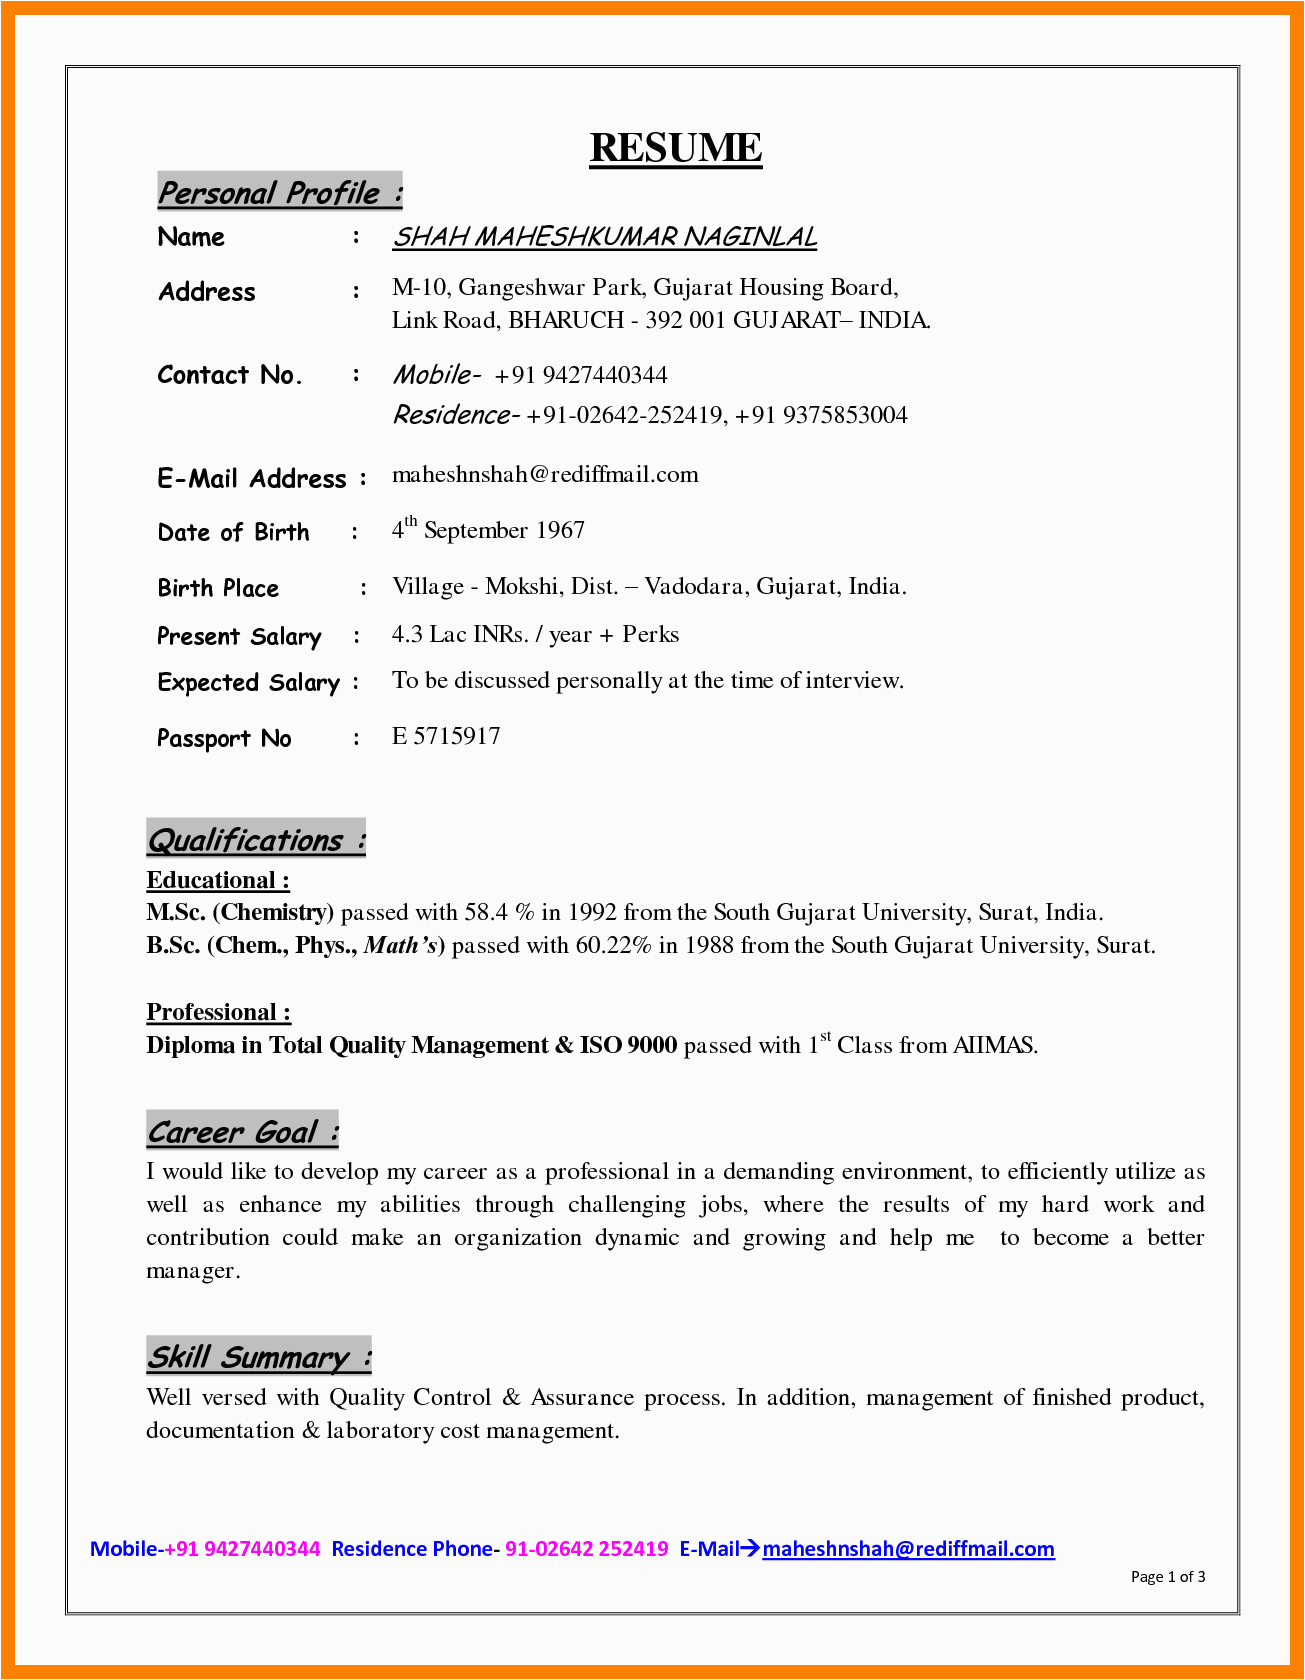 Sample Resume format for Personal Information Image Result for Cv with Personal Details Sample